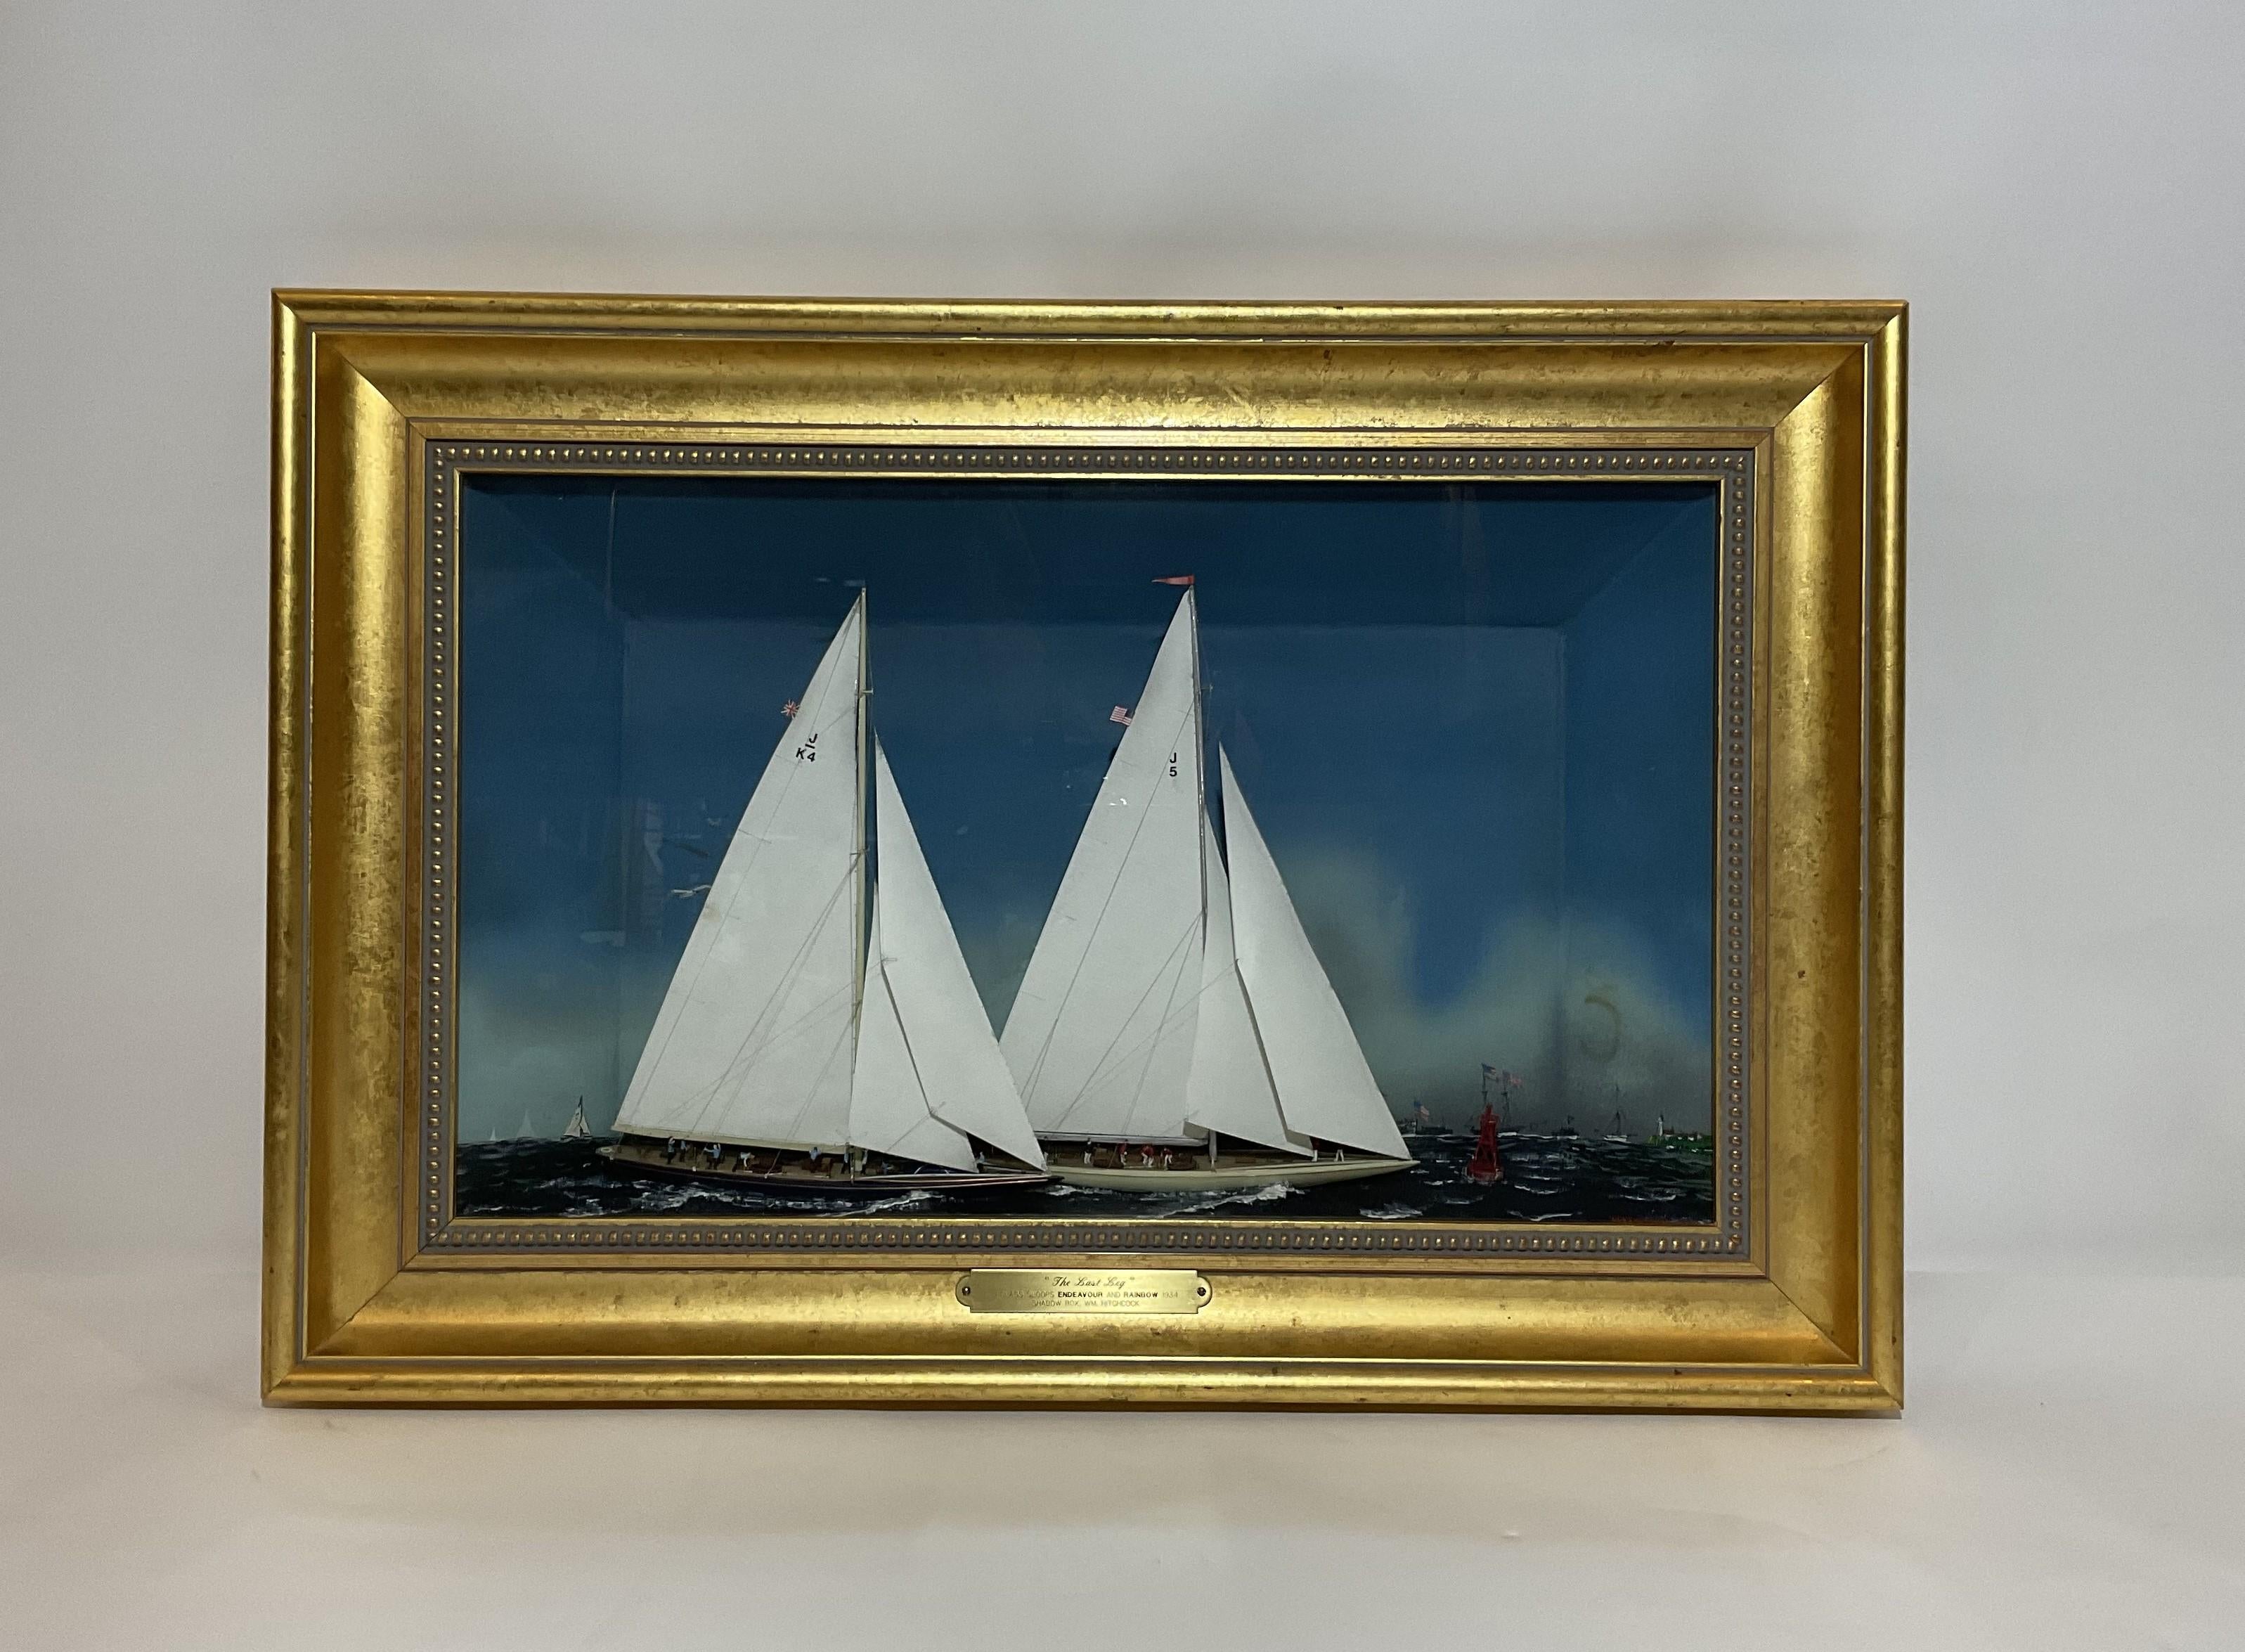 North American Americas Cup Yacht Wall Mount Diorama For Sale